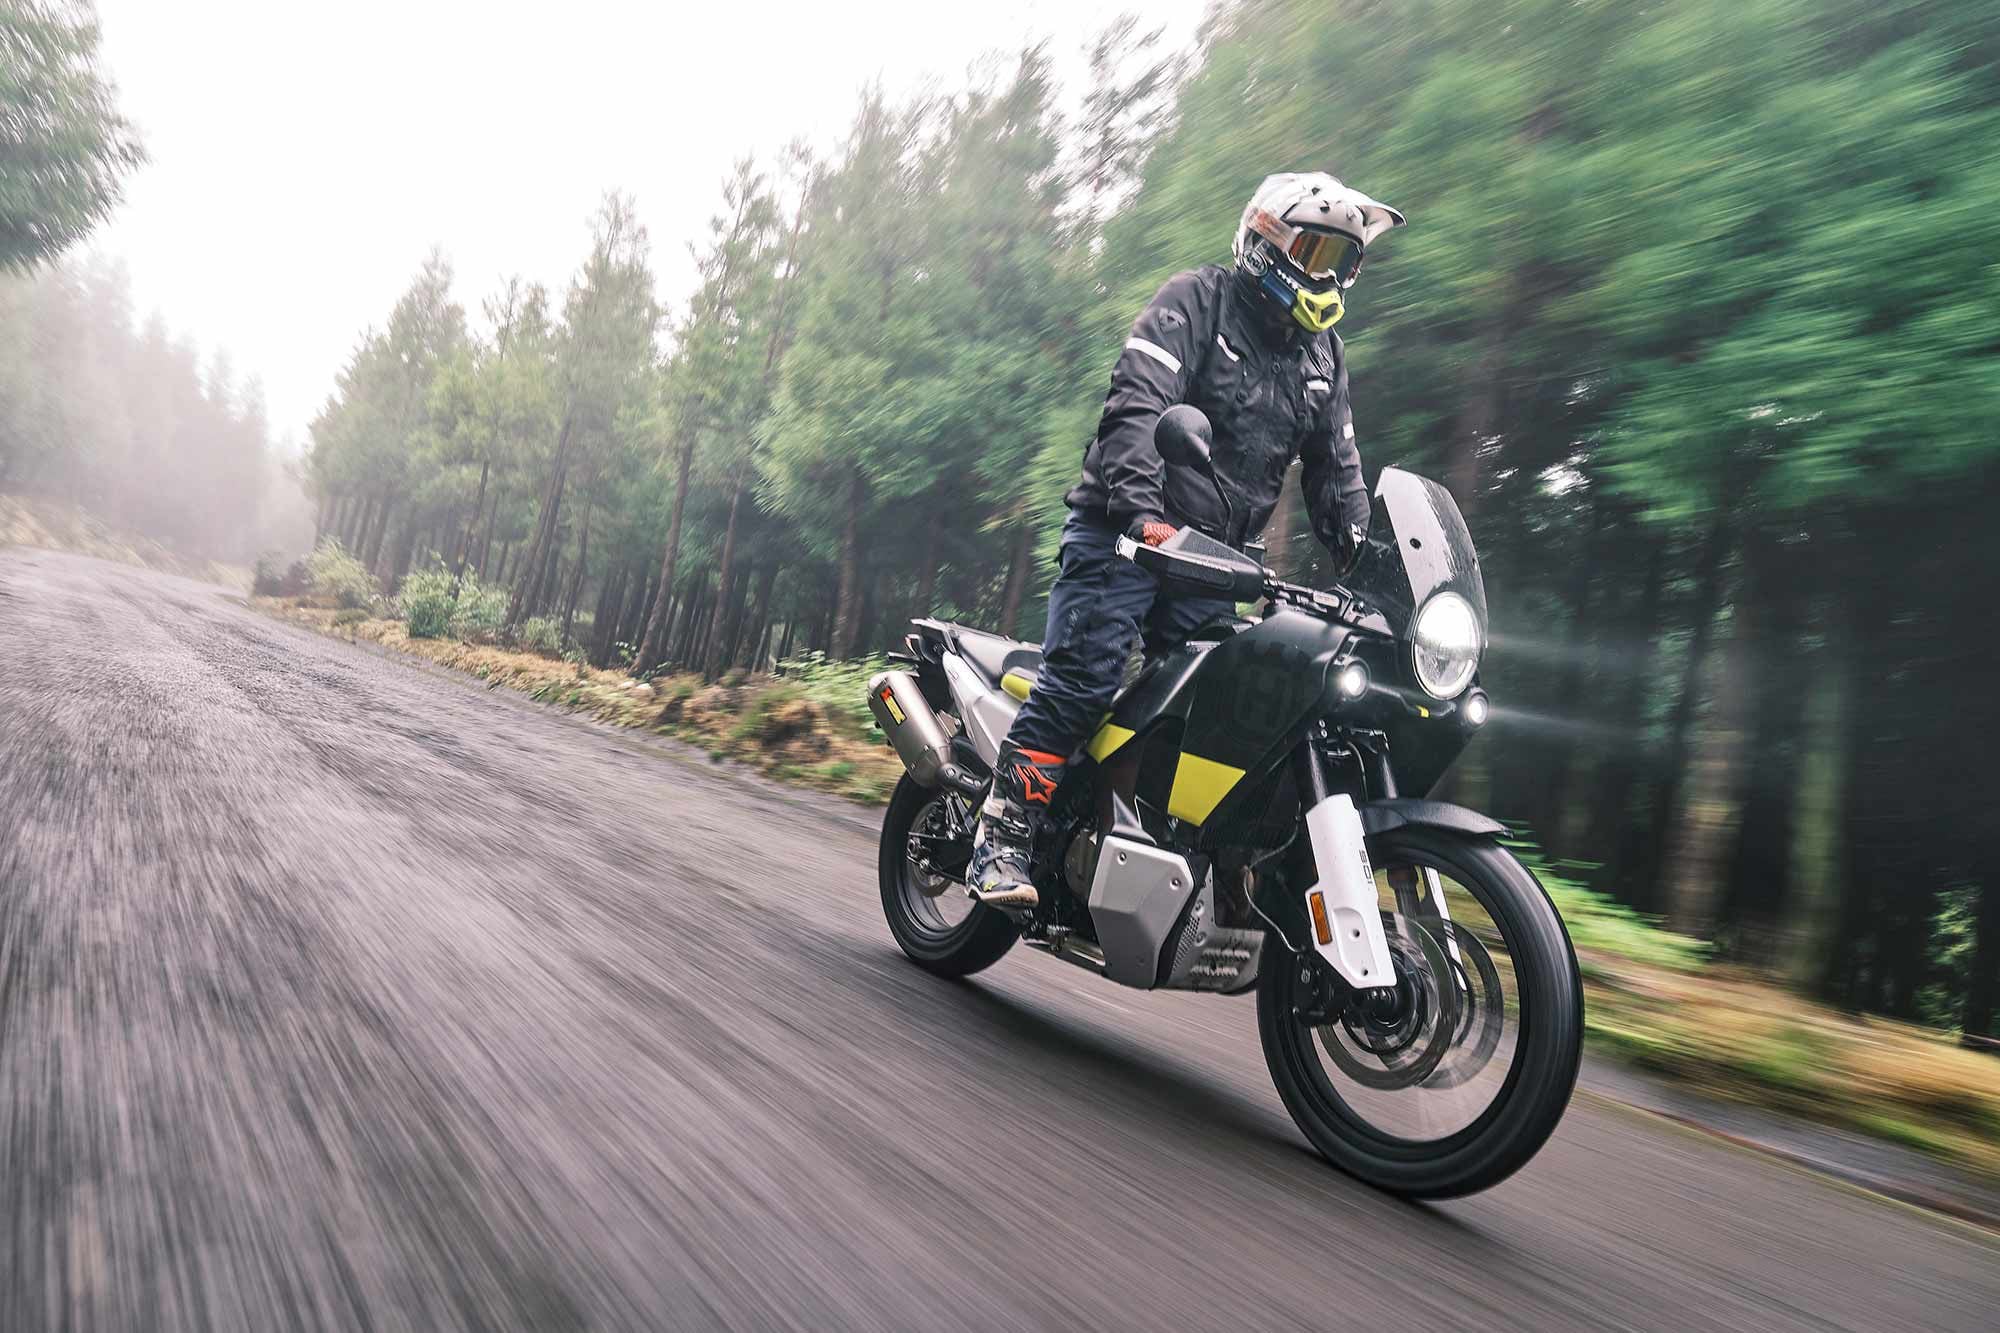 Husqvarna’s Norden 901 is a comfortable and capable adventure motorcycle.